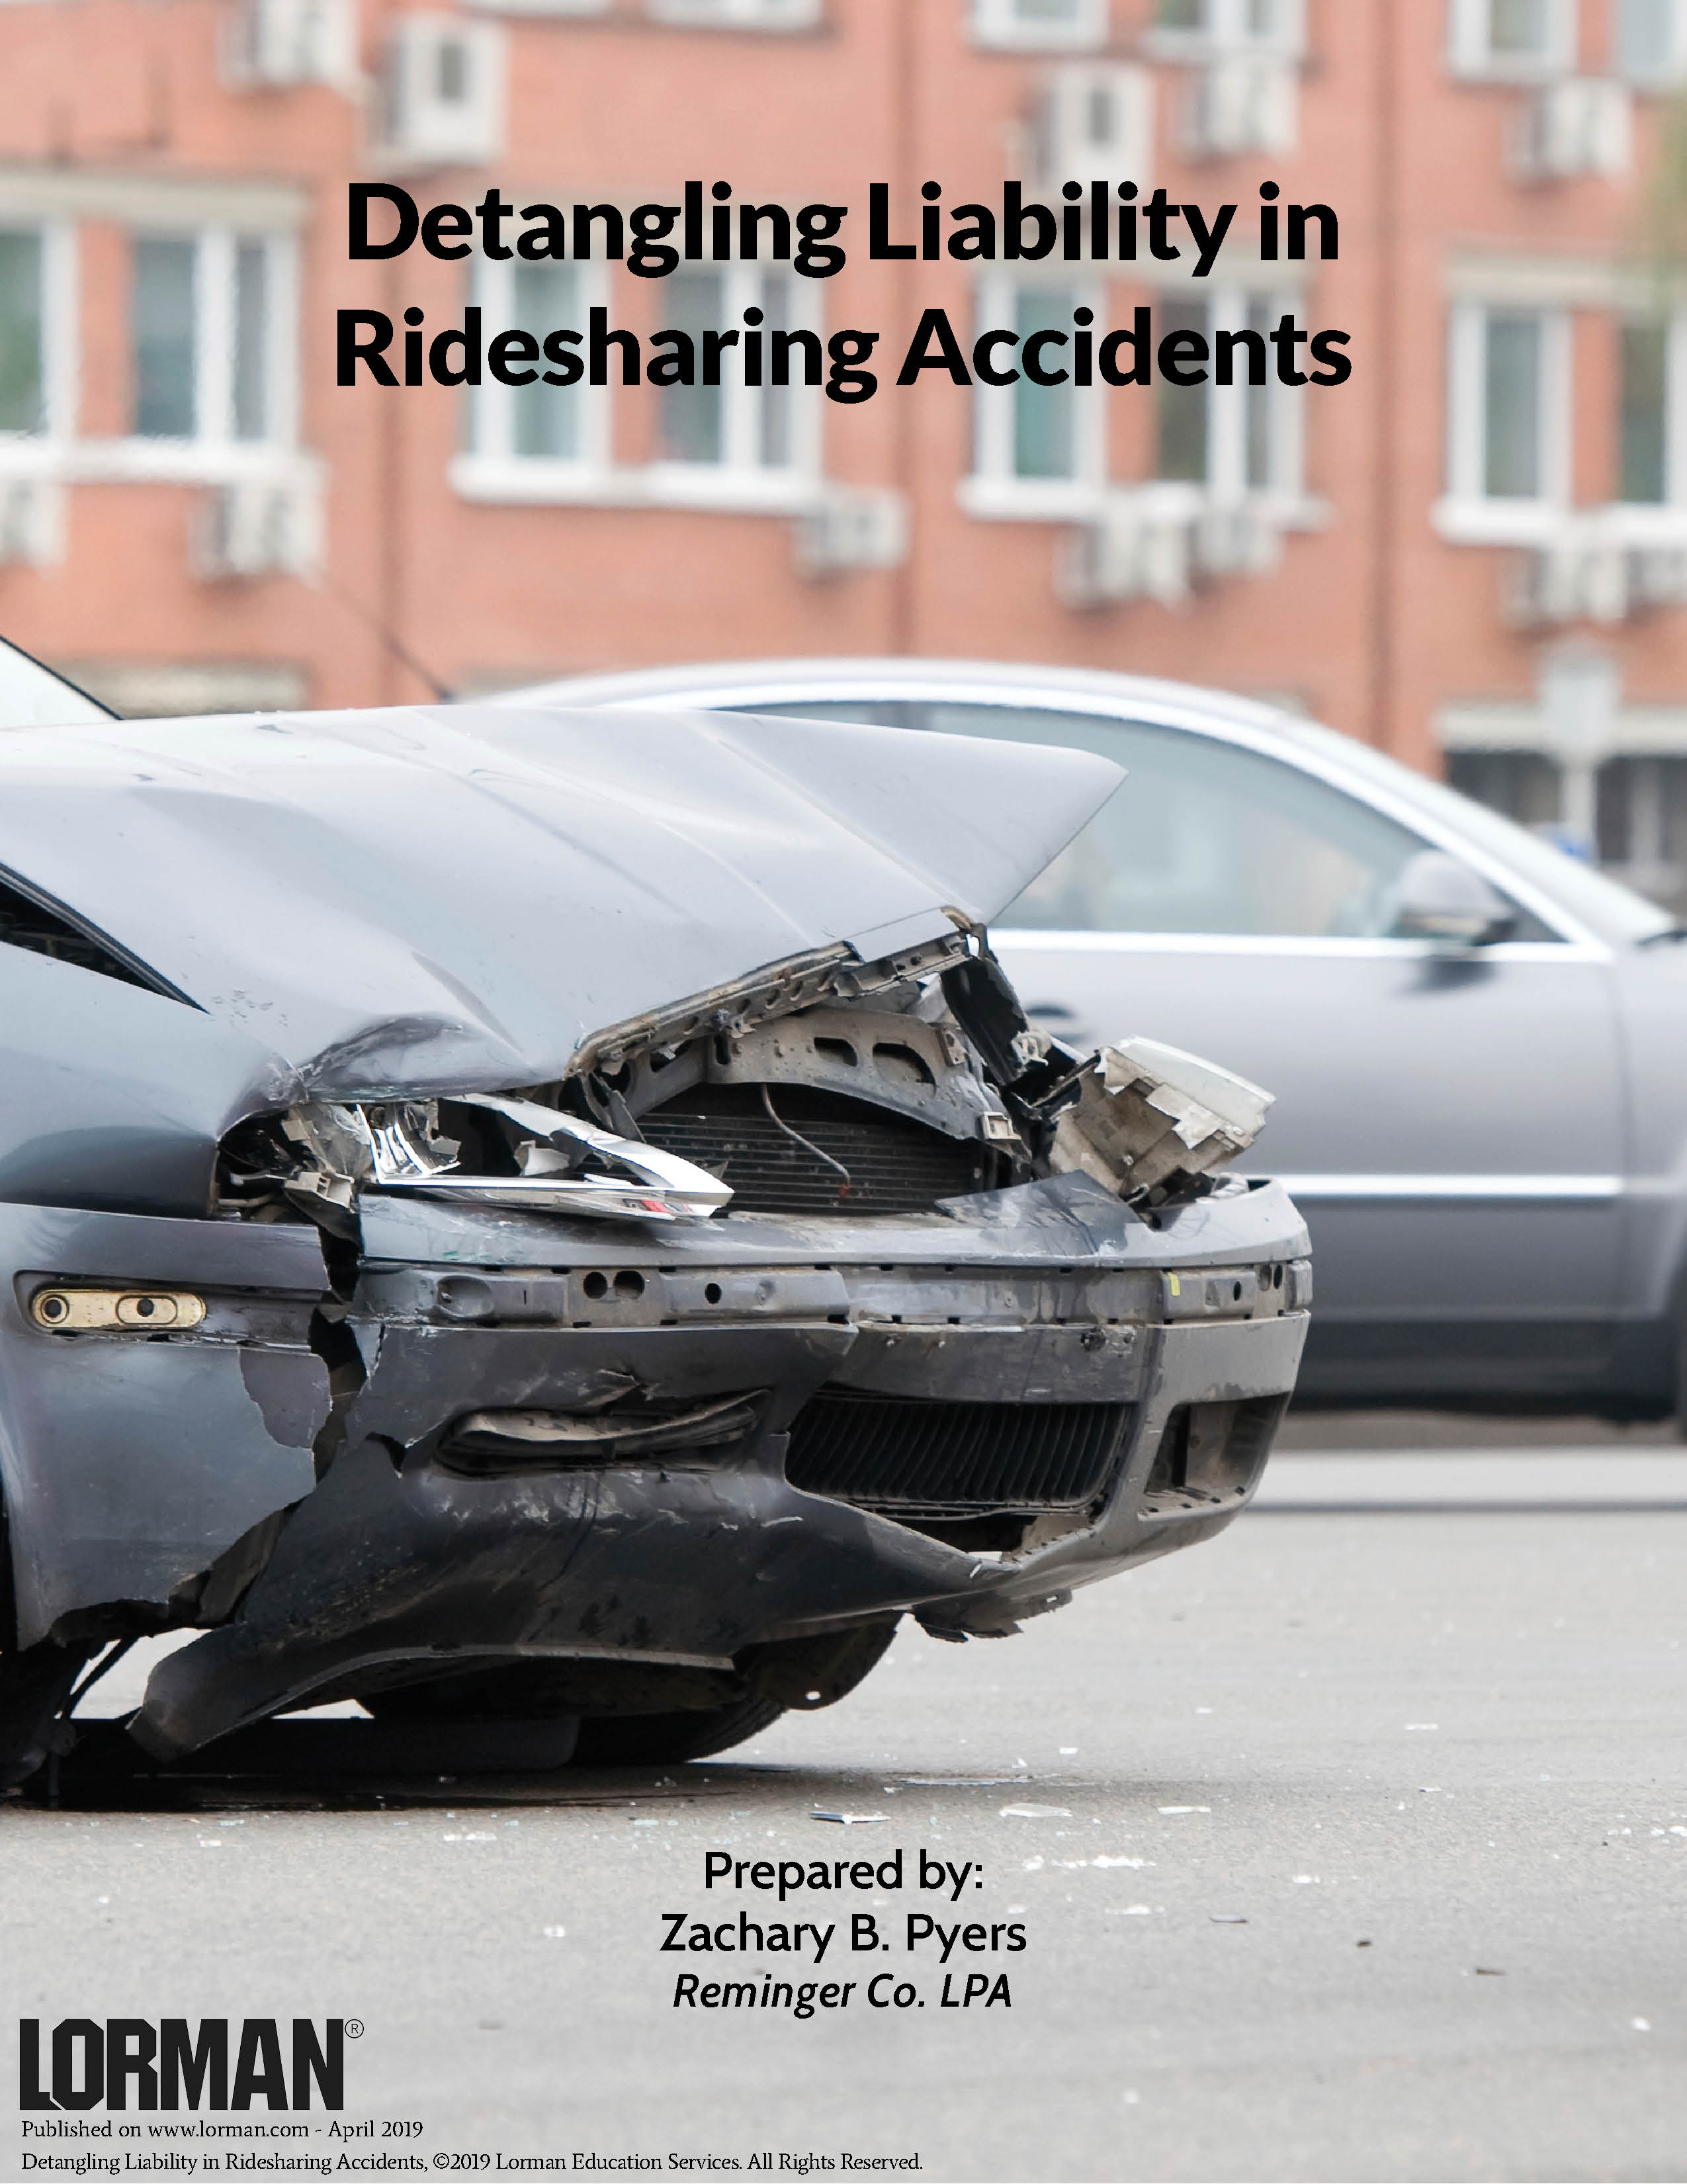 Detangling Liability in Ridesharing Accidents